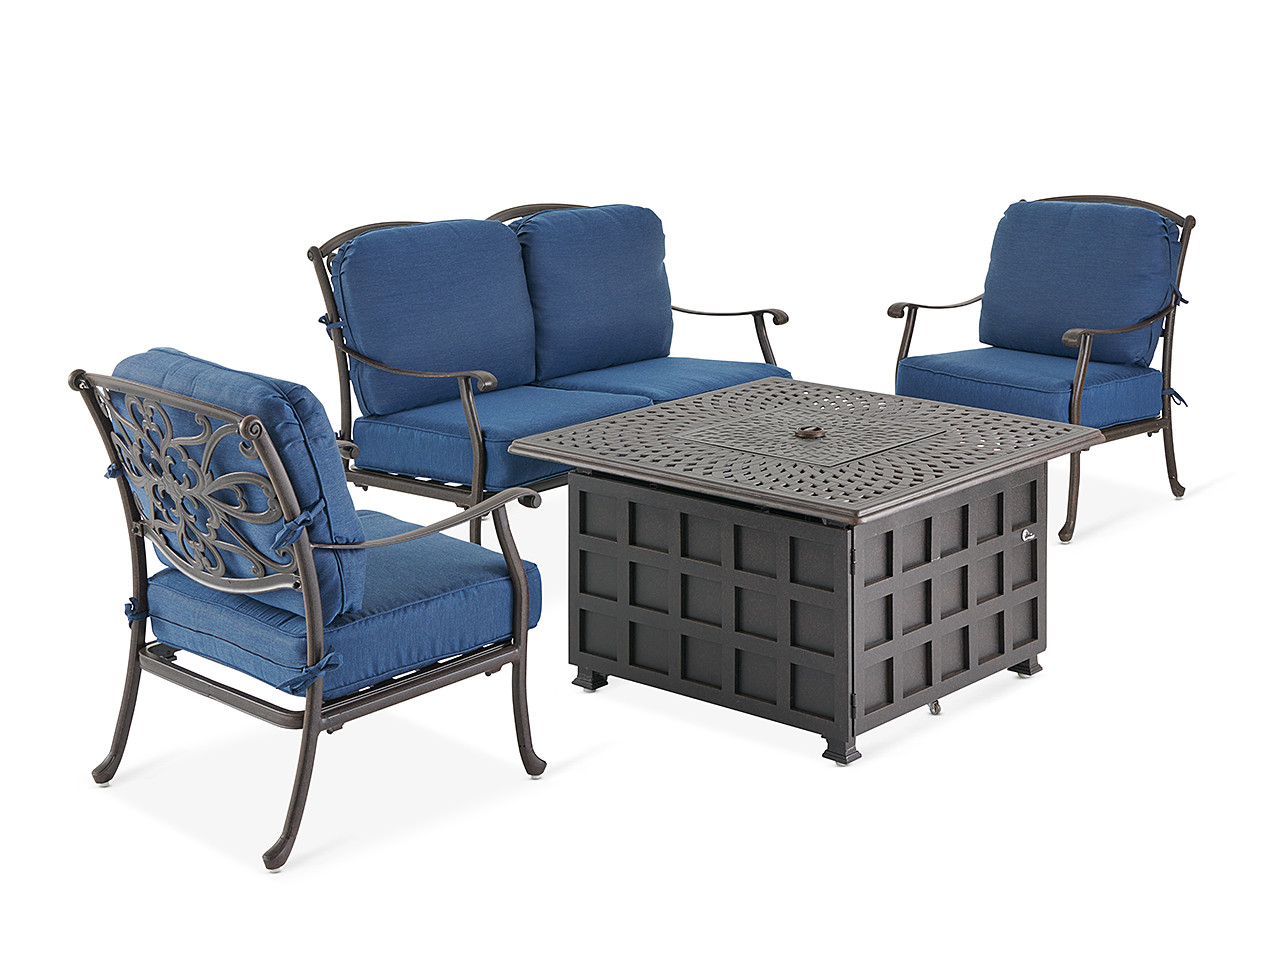 Carlisle Aged Bronze Cast Aluminum and Navy Cushion 4 pc. Loveseat Group with 42 in. Sq. Firepit Table